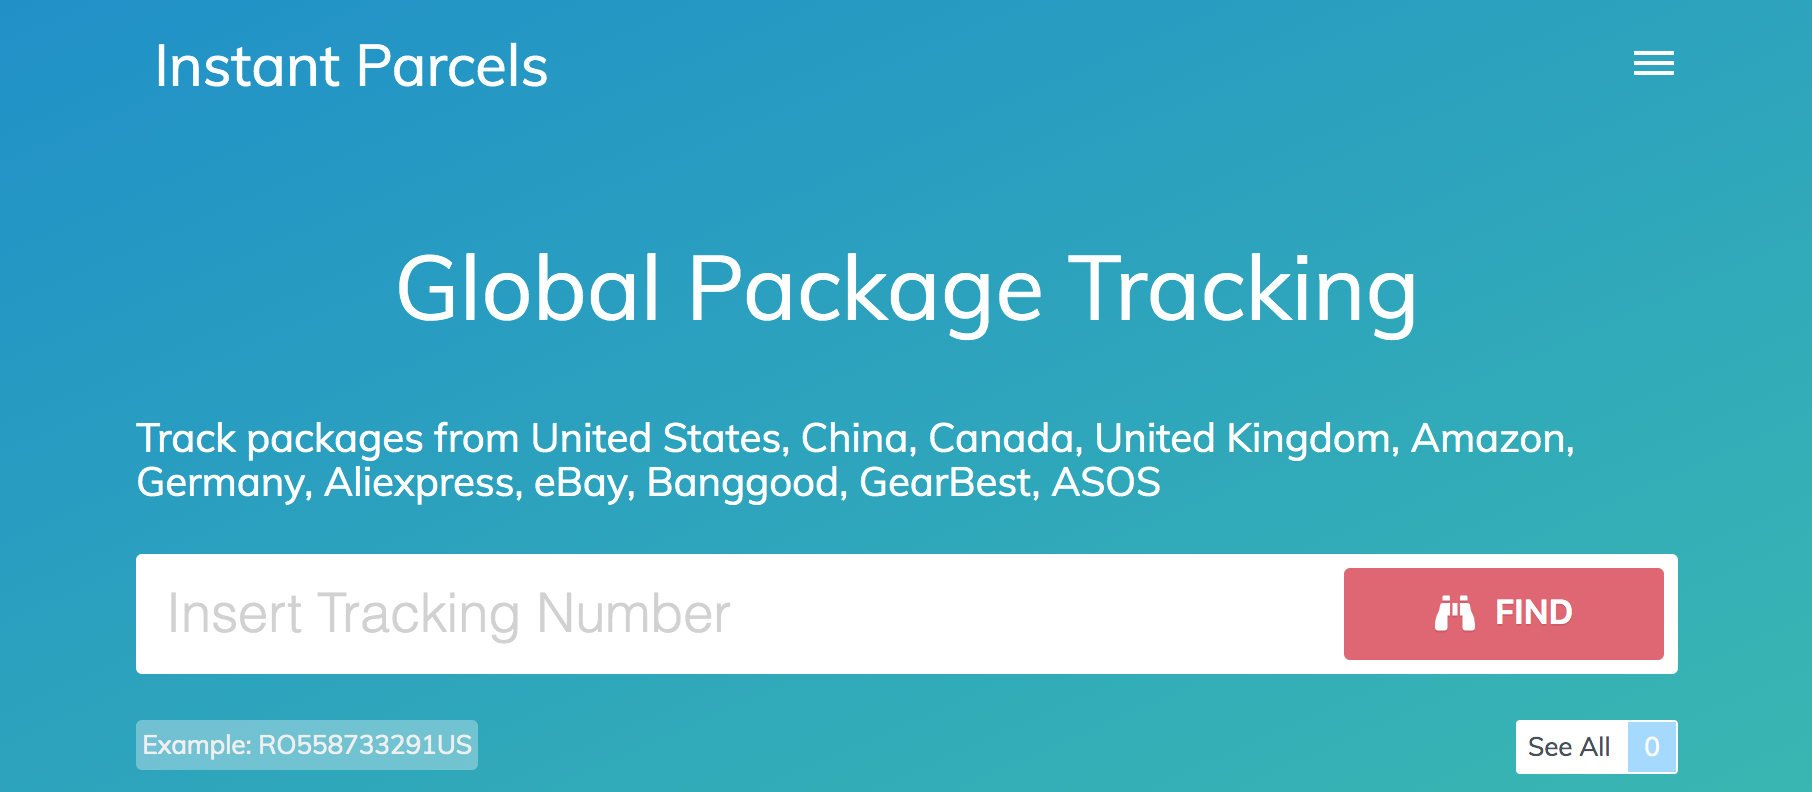 Instant Parcels - Universal Parcel Tracking Tool